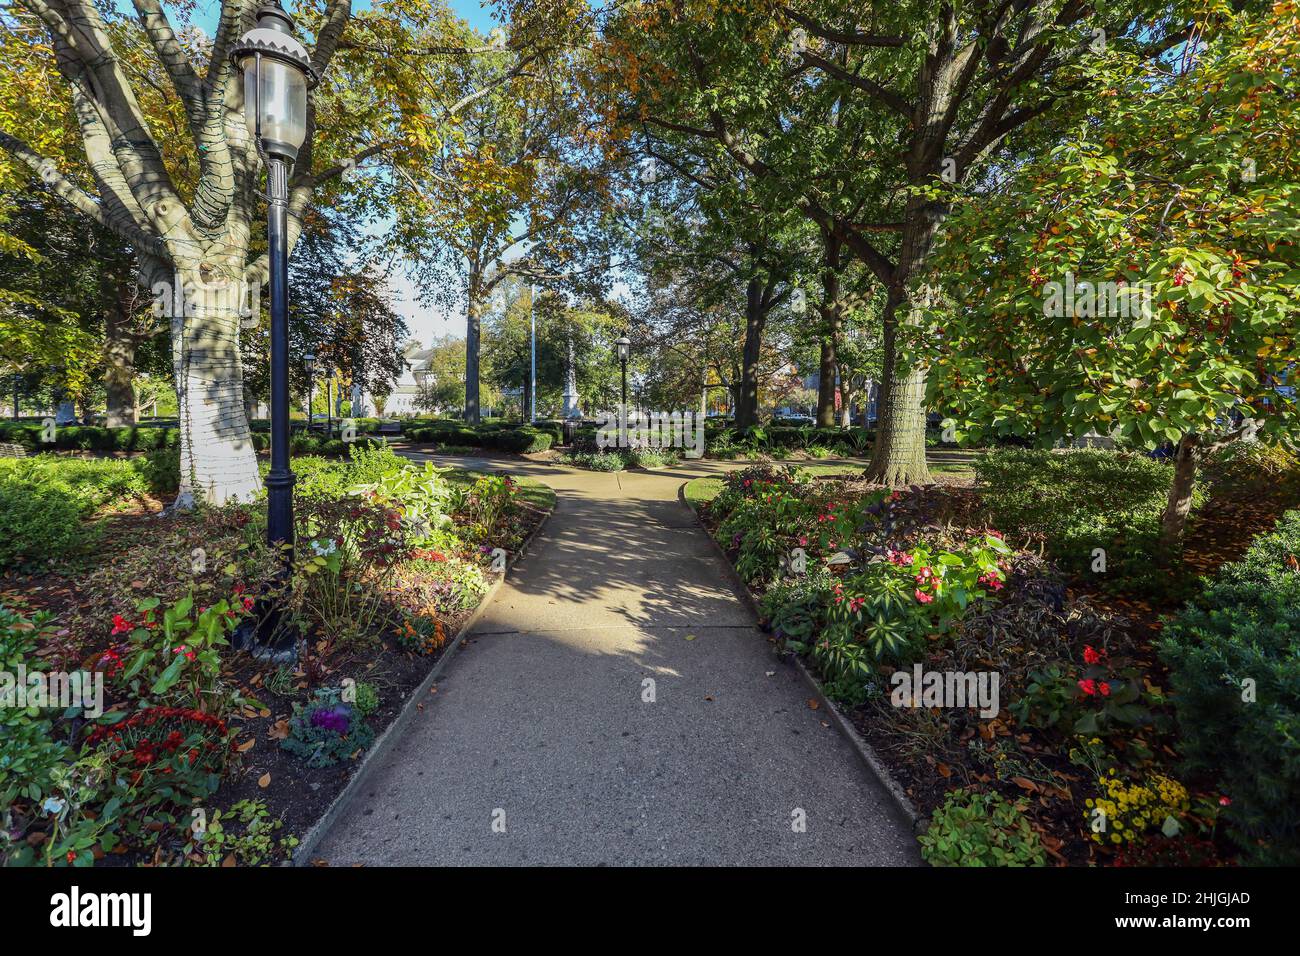 Morristown, NJ USA - November 6, 2021: Morristown Green on a late fall afternoon Stock Photo